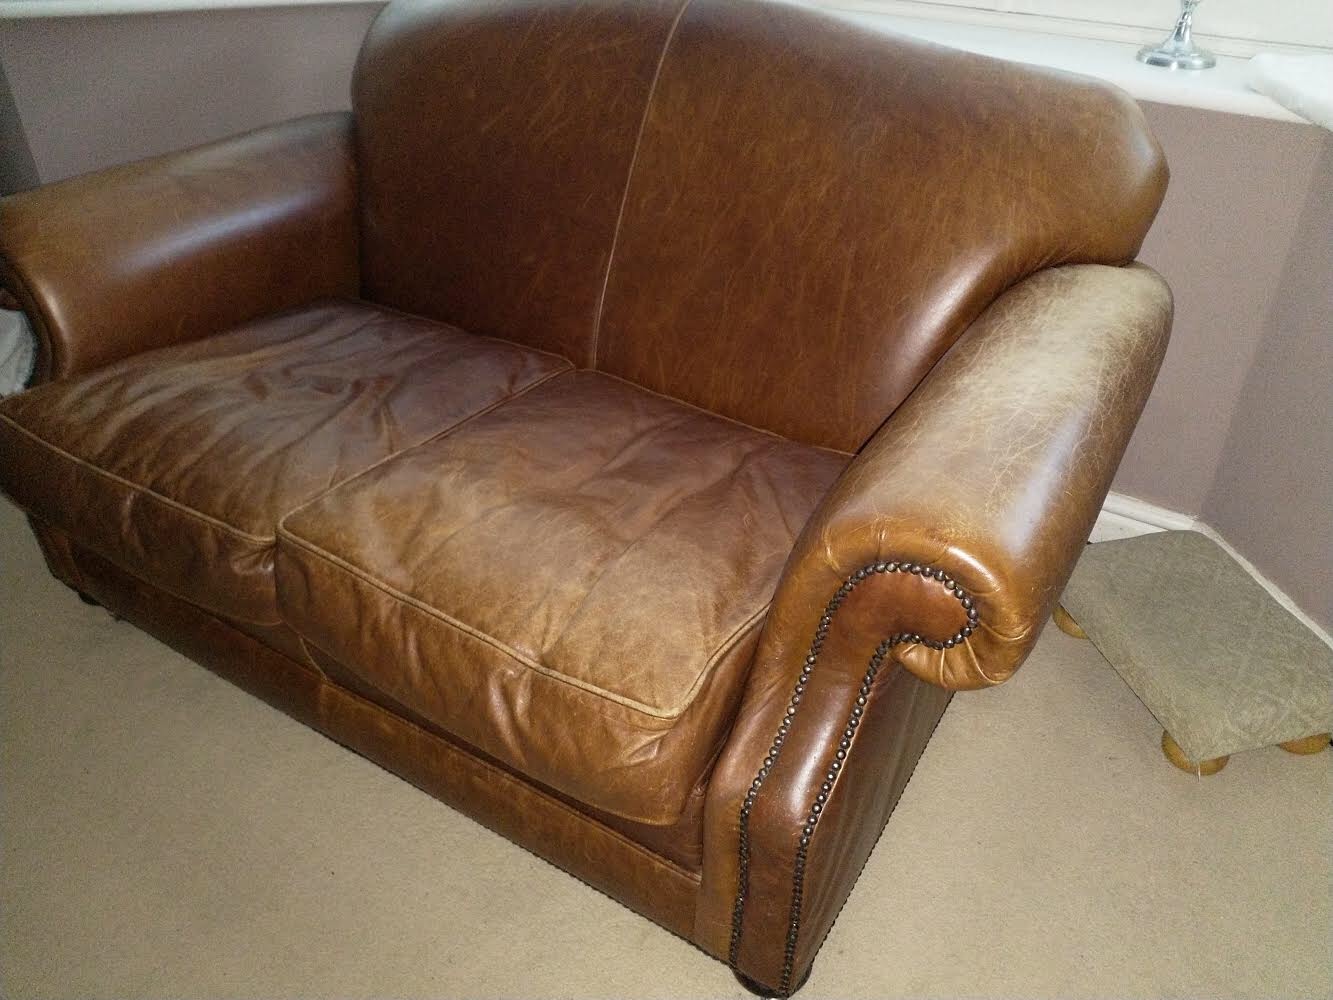 Fading Leather Pro Rers, Sun Damaged Leather Couch